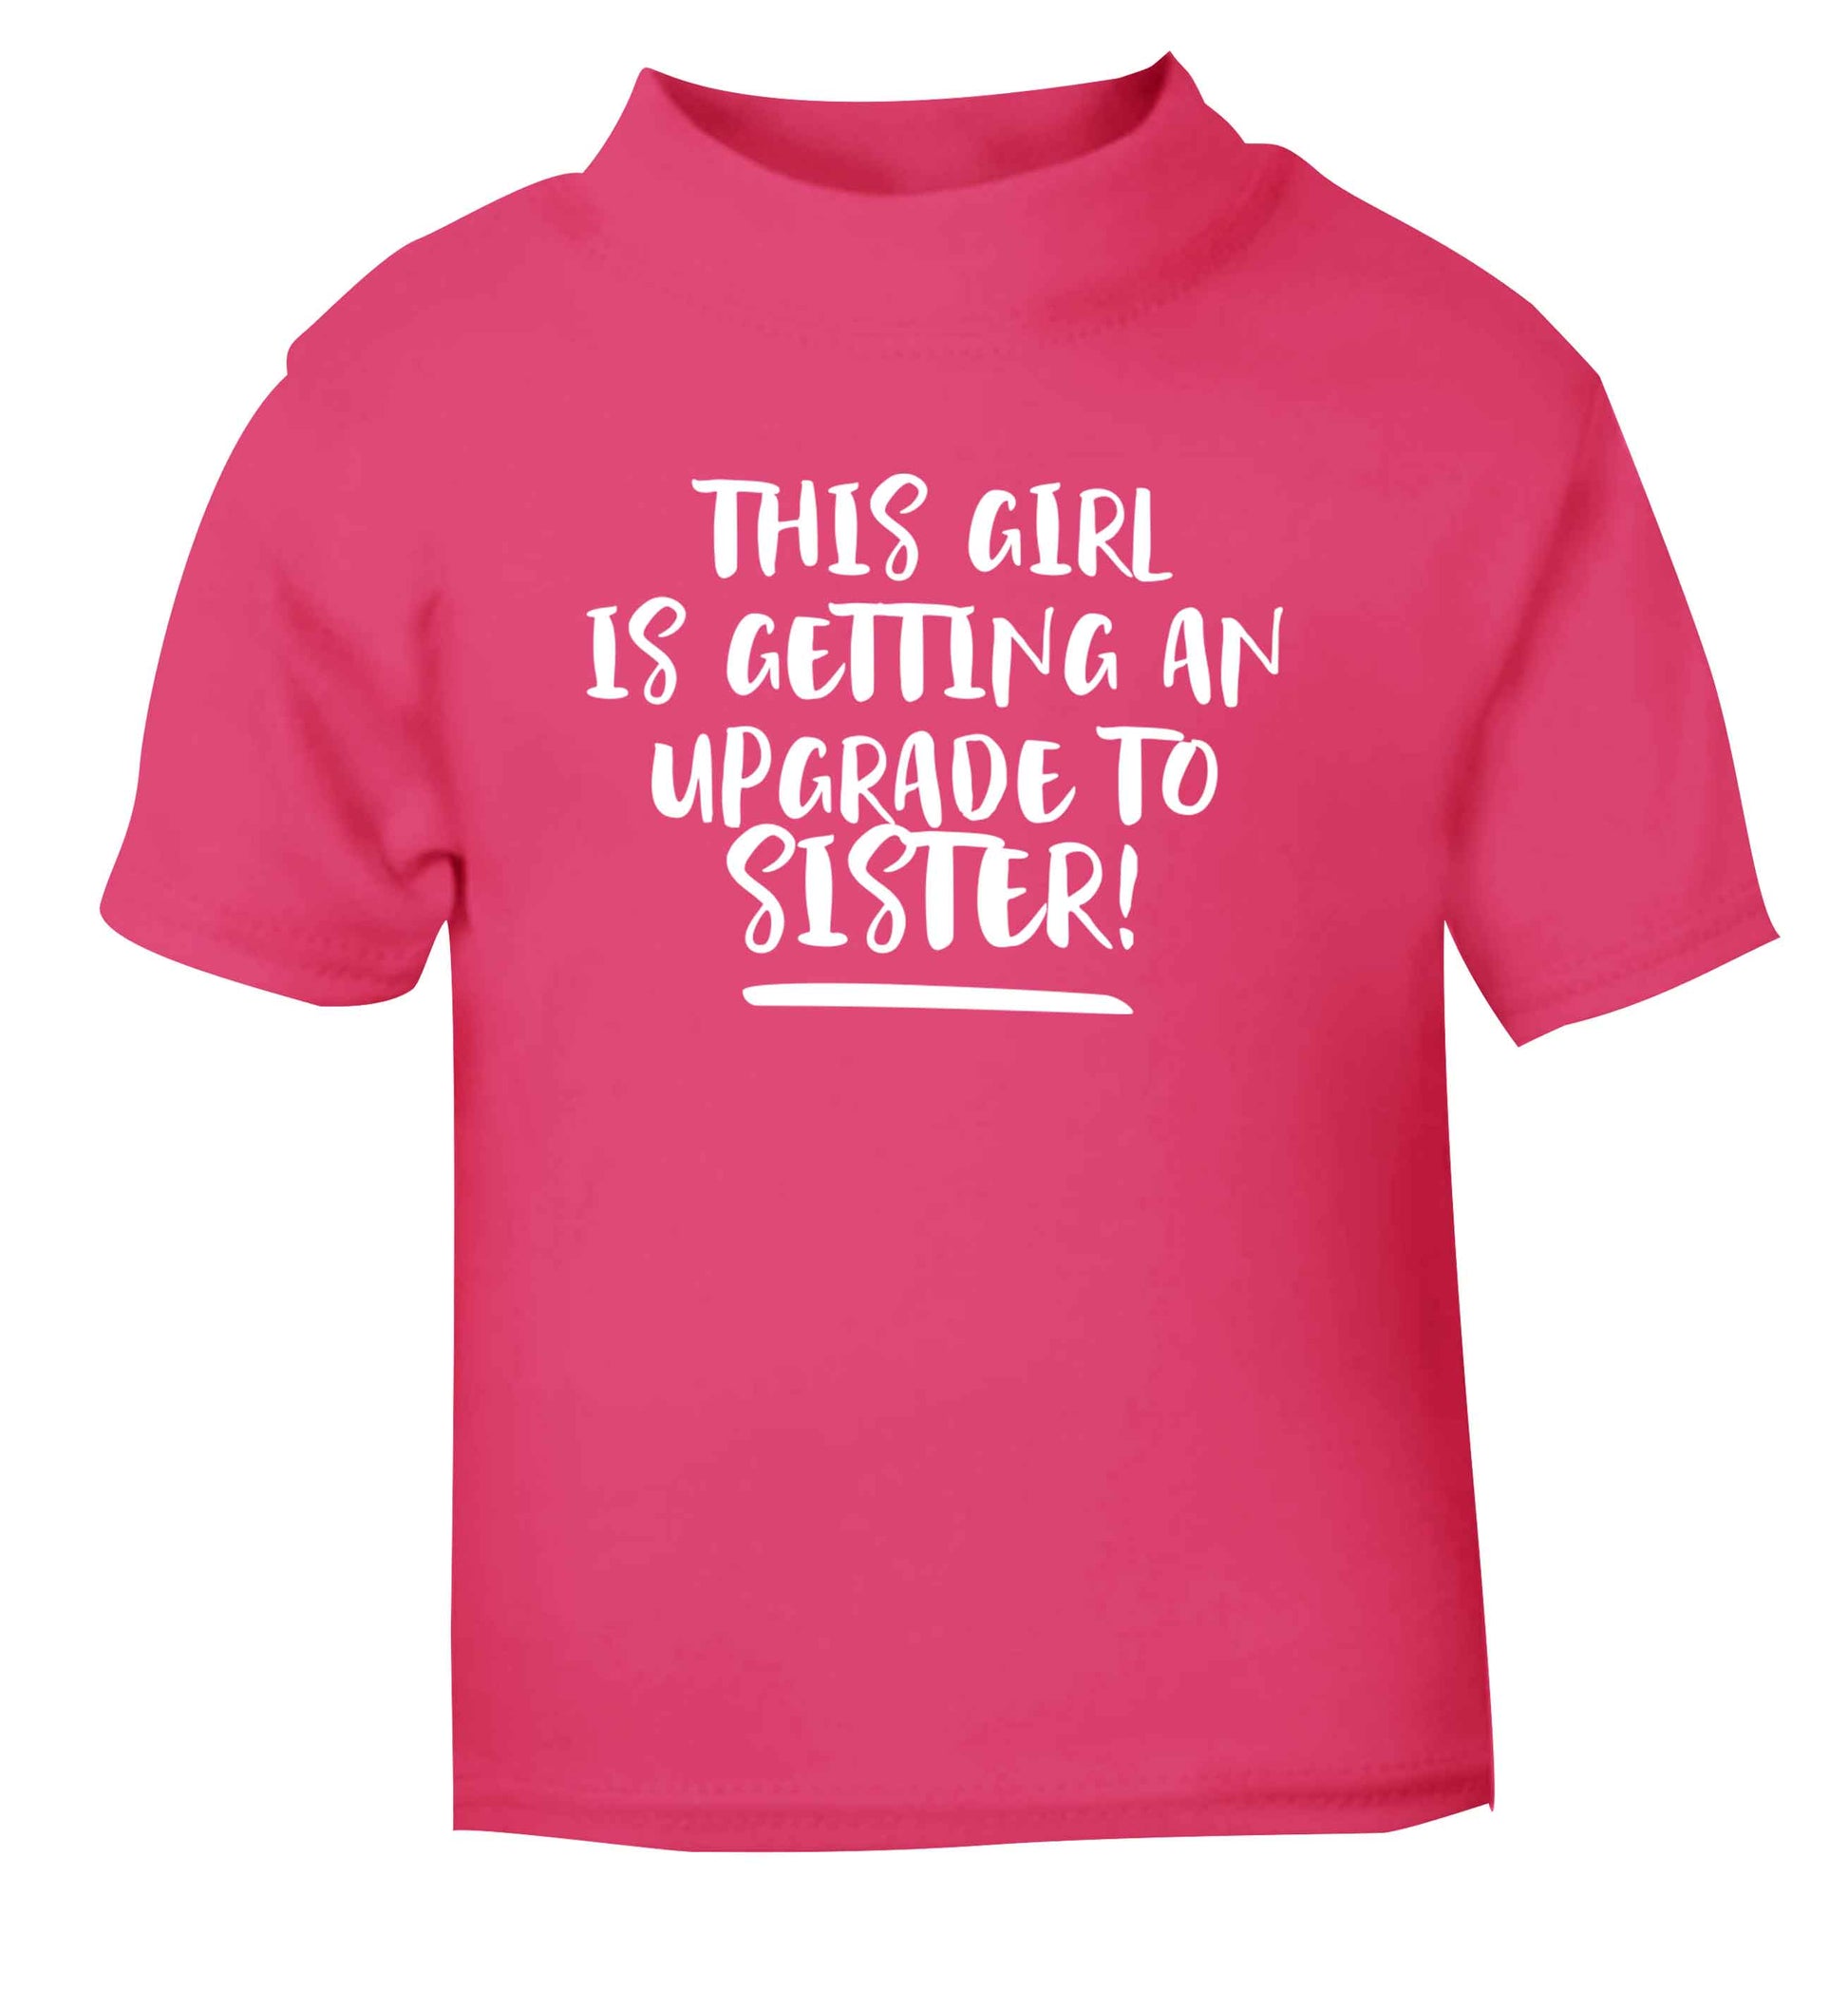 This girl is getting an upgrade to sister! pink Baby Toddler Tshirt 2 Years